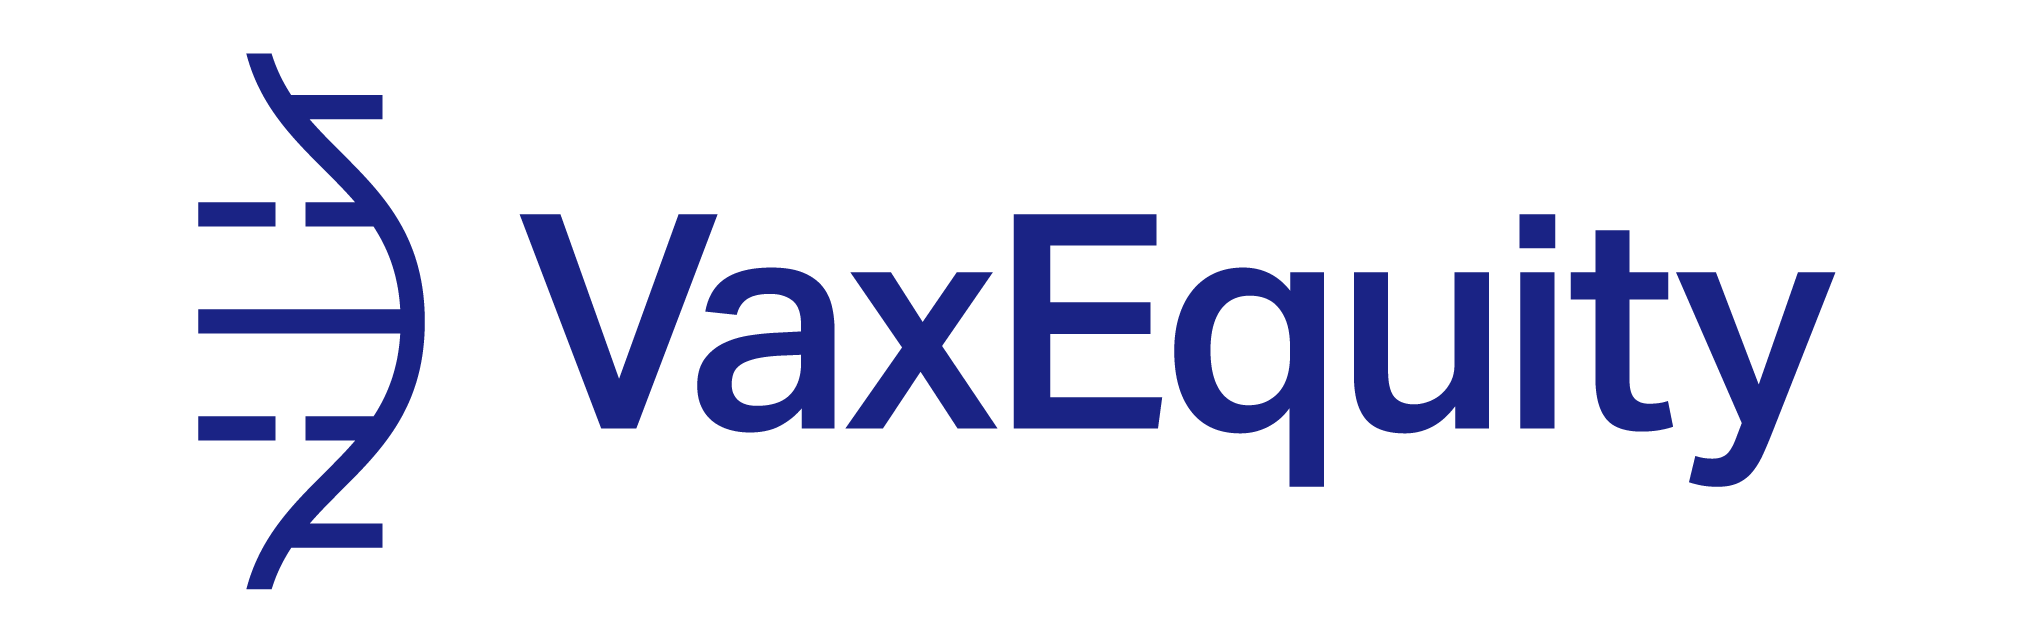 VaxEquity and CPI Announces Innovate UK Grant to Accelerate Next Generation RNA Vaccines and Therapeutics